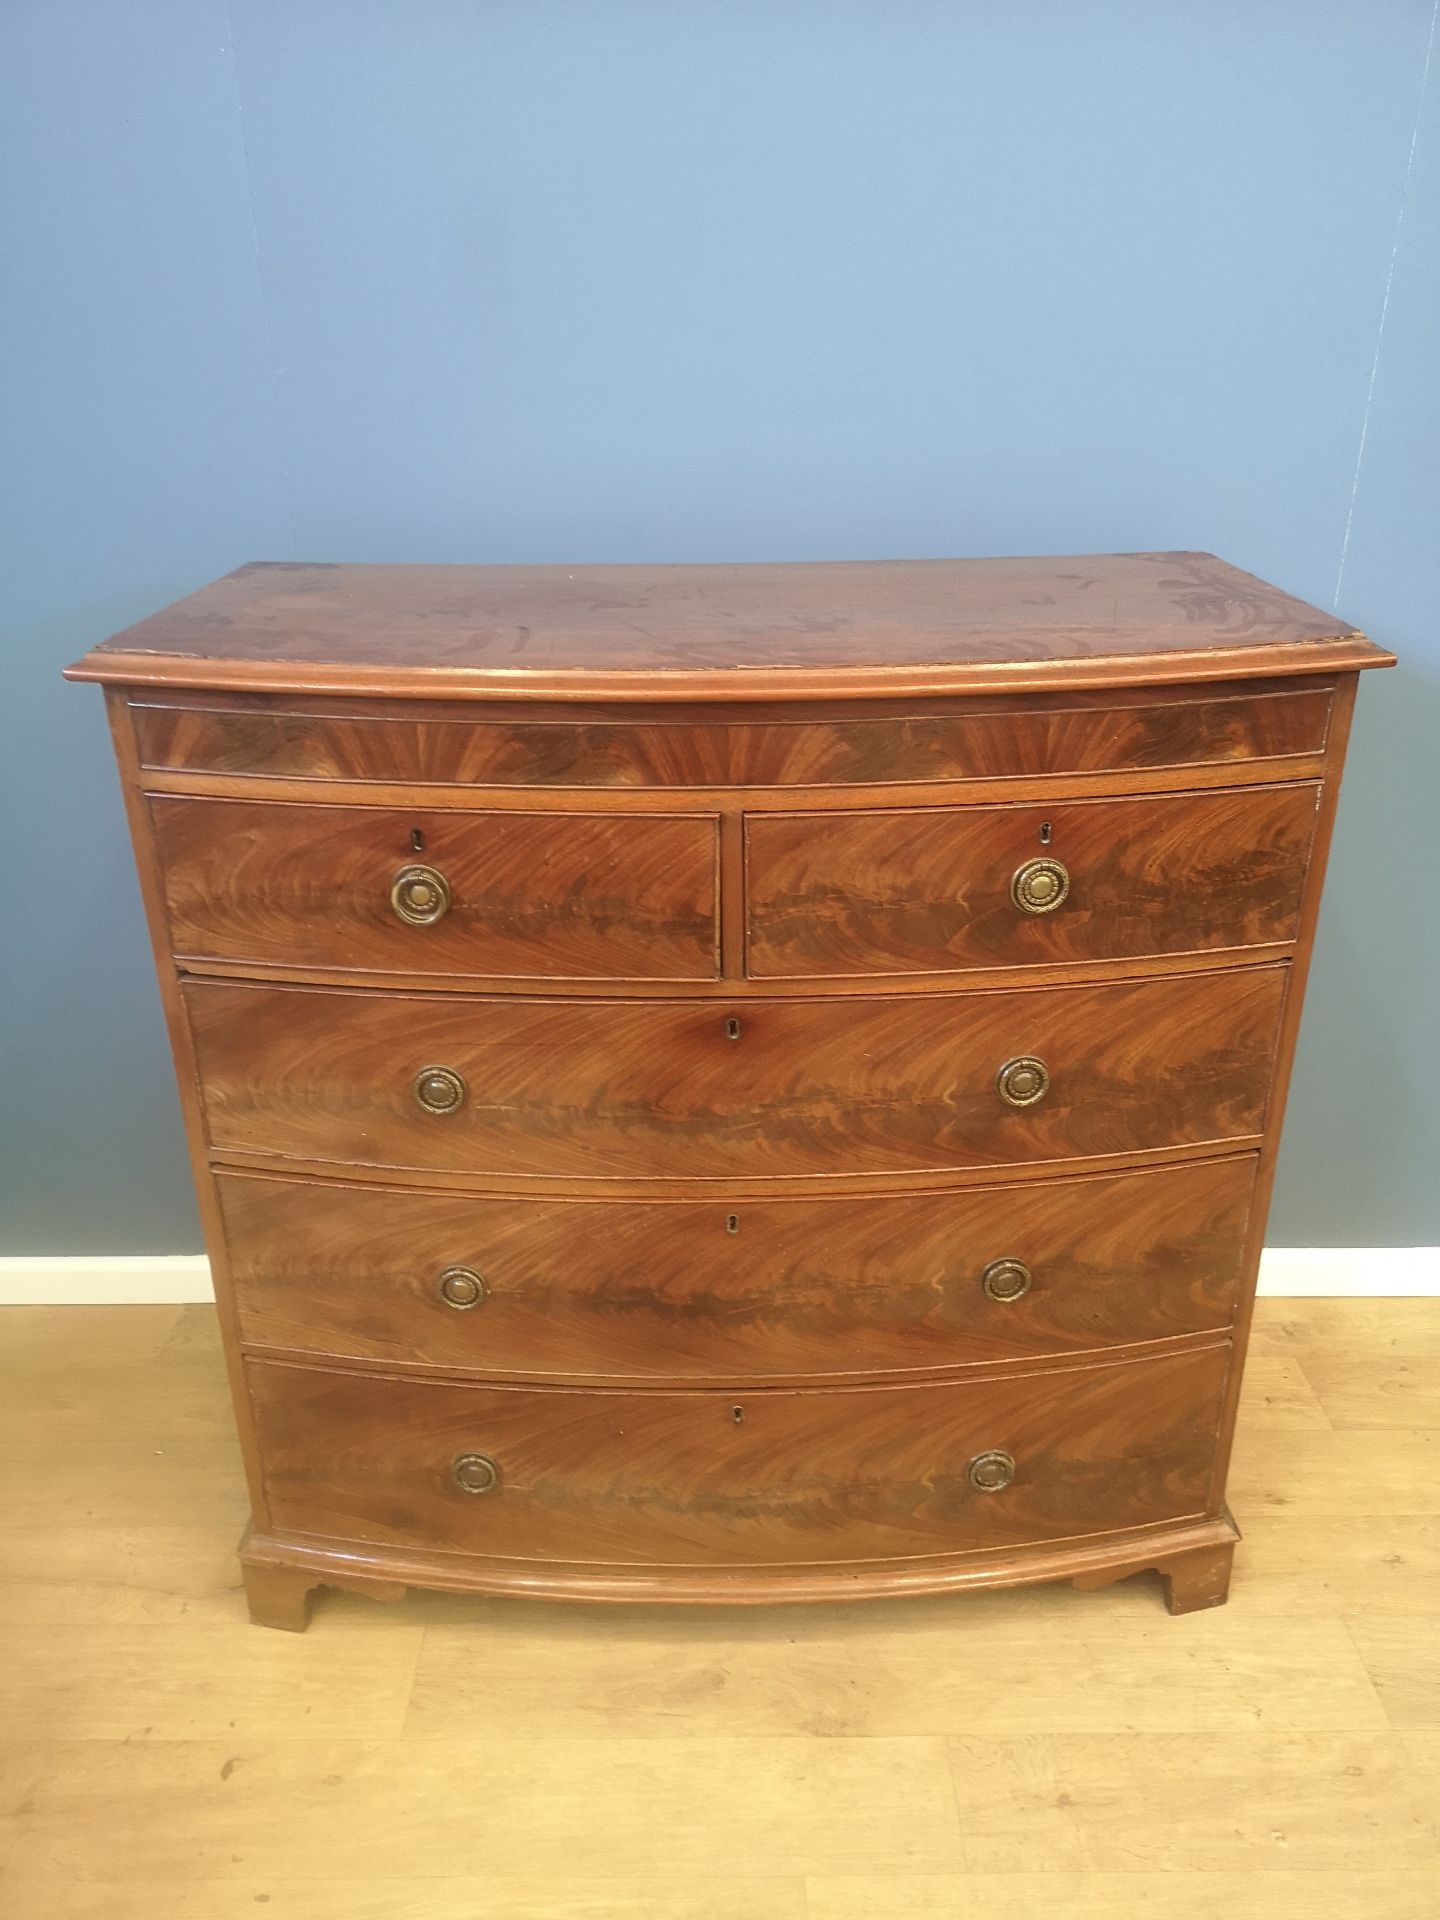 Mahogany bow fronted chest of drawers